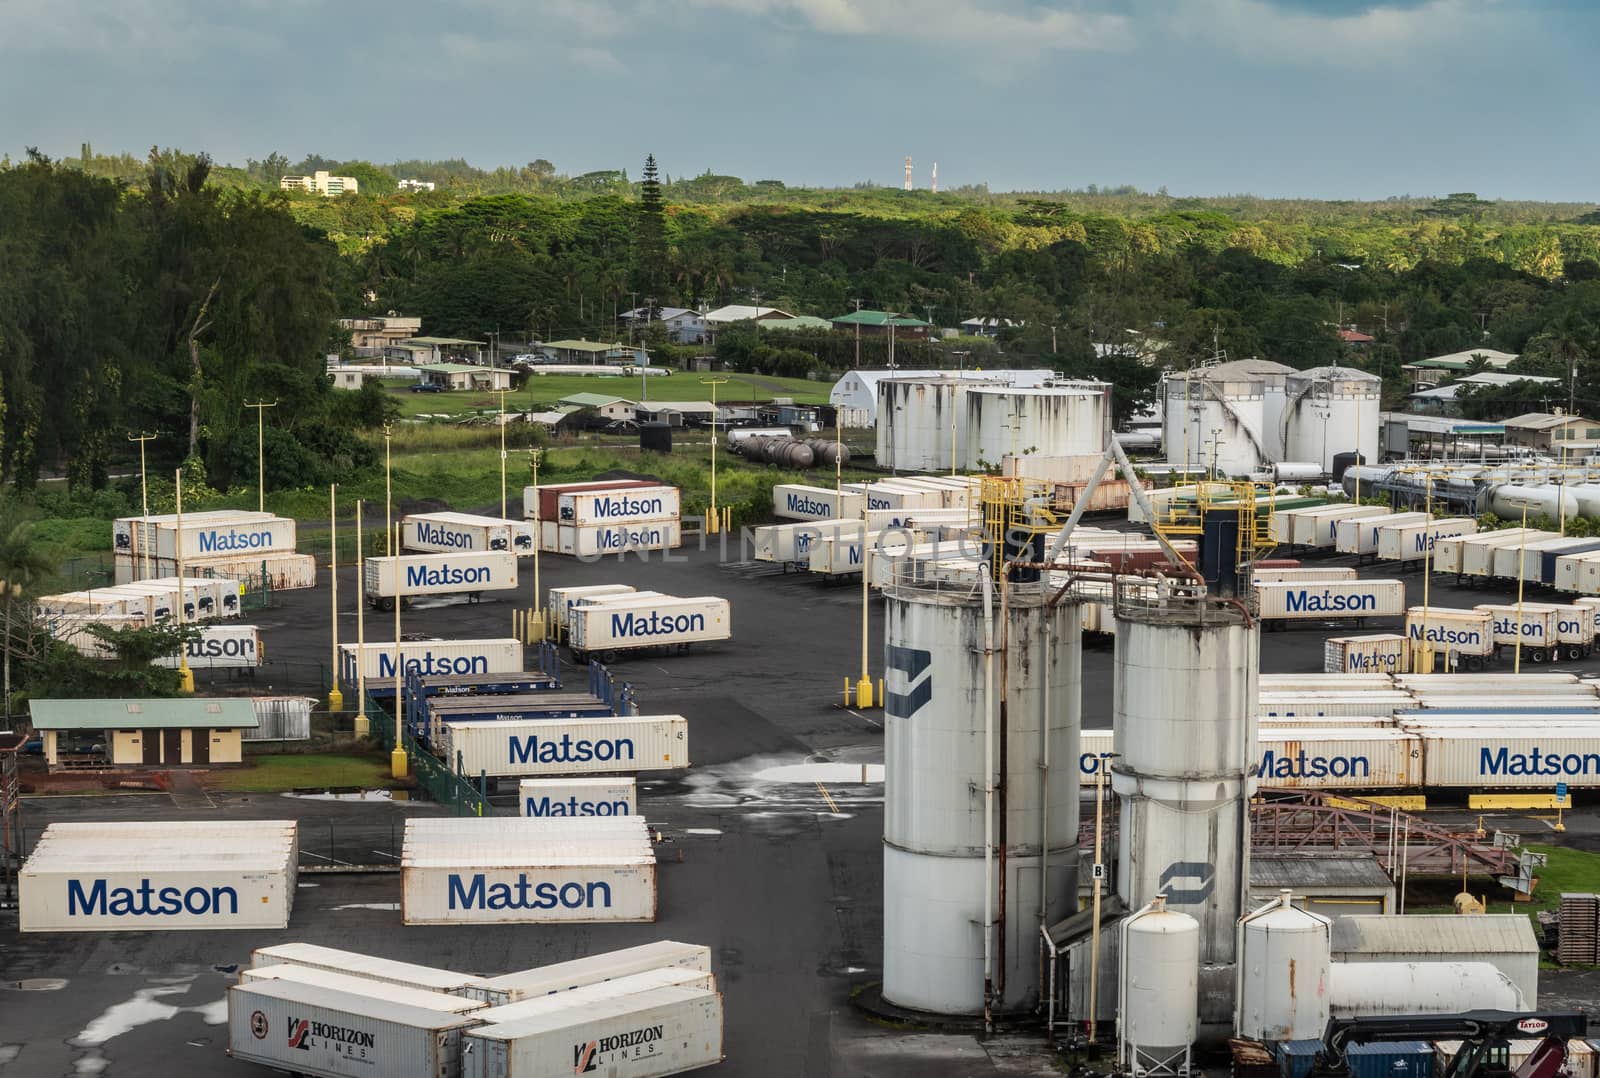 Hilo, Hawaii, USA. - January 14, 2020: Ocean port. White fuel tanks surrounded by Matson shipping containers placed on trailers. Green tree on horizon.